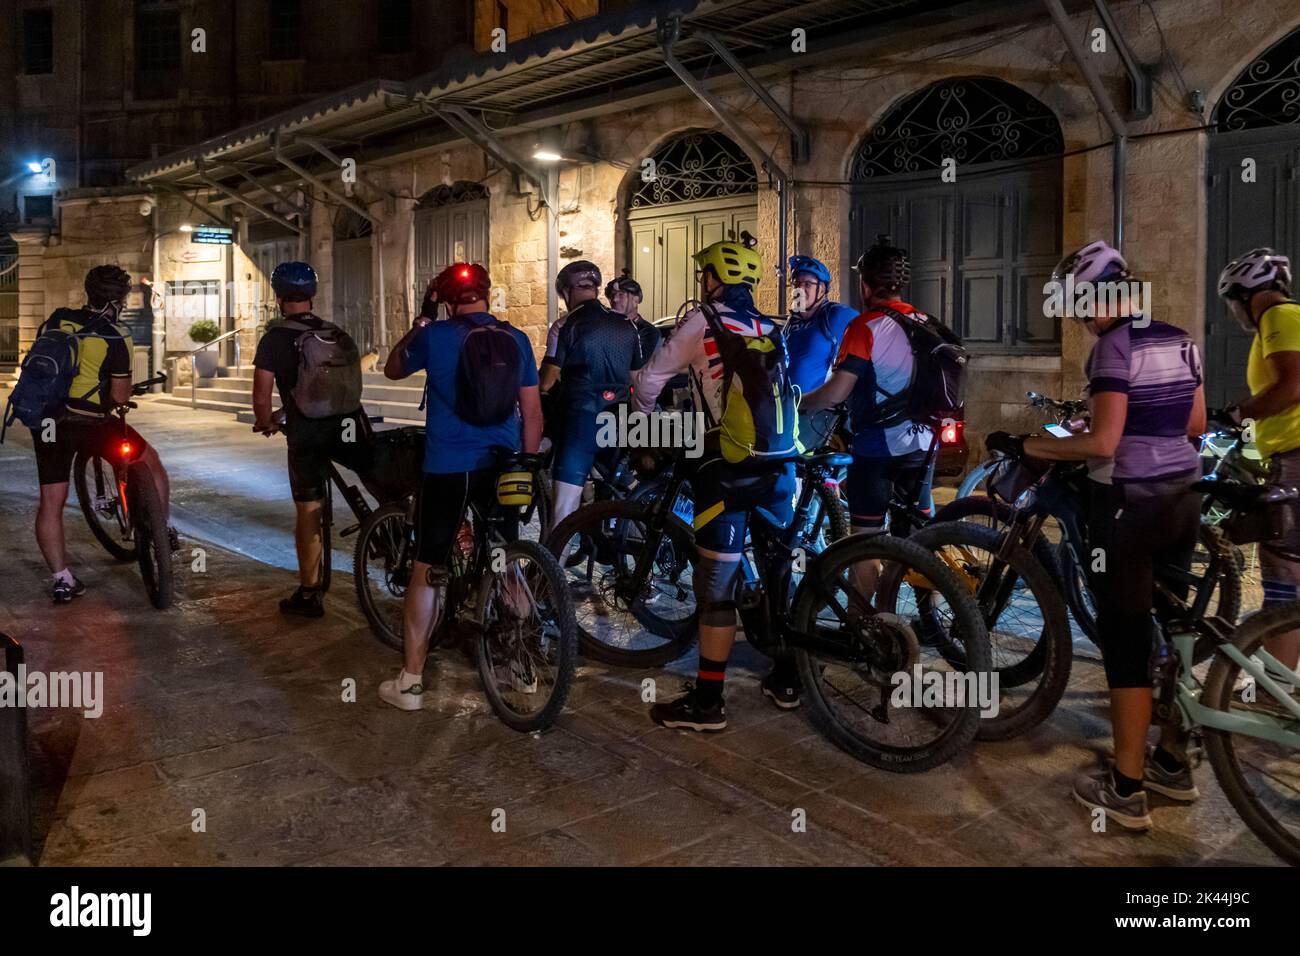 A group of bicyclers touring the old city of Jerusalem Israel Stock Photo